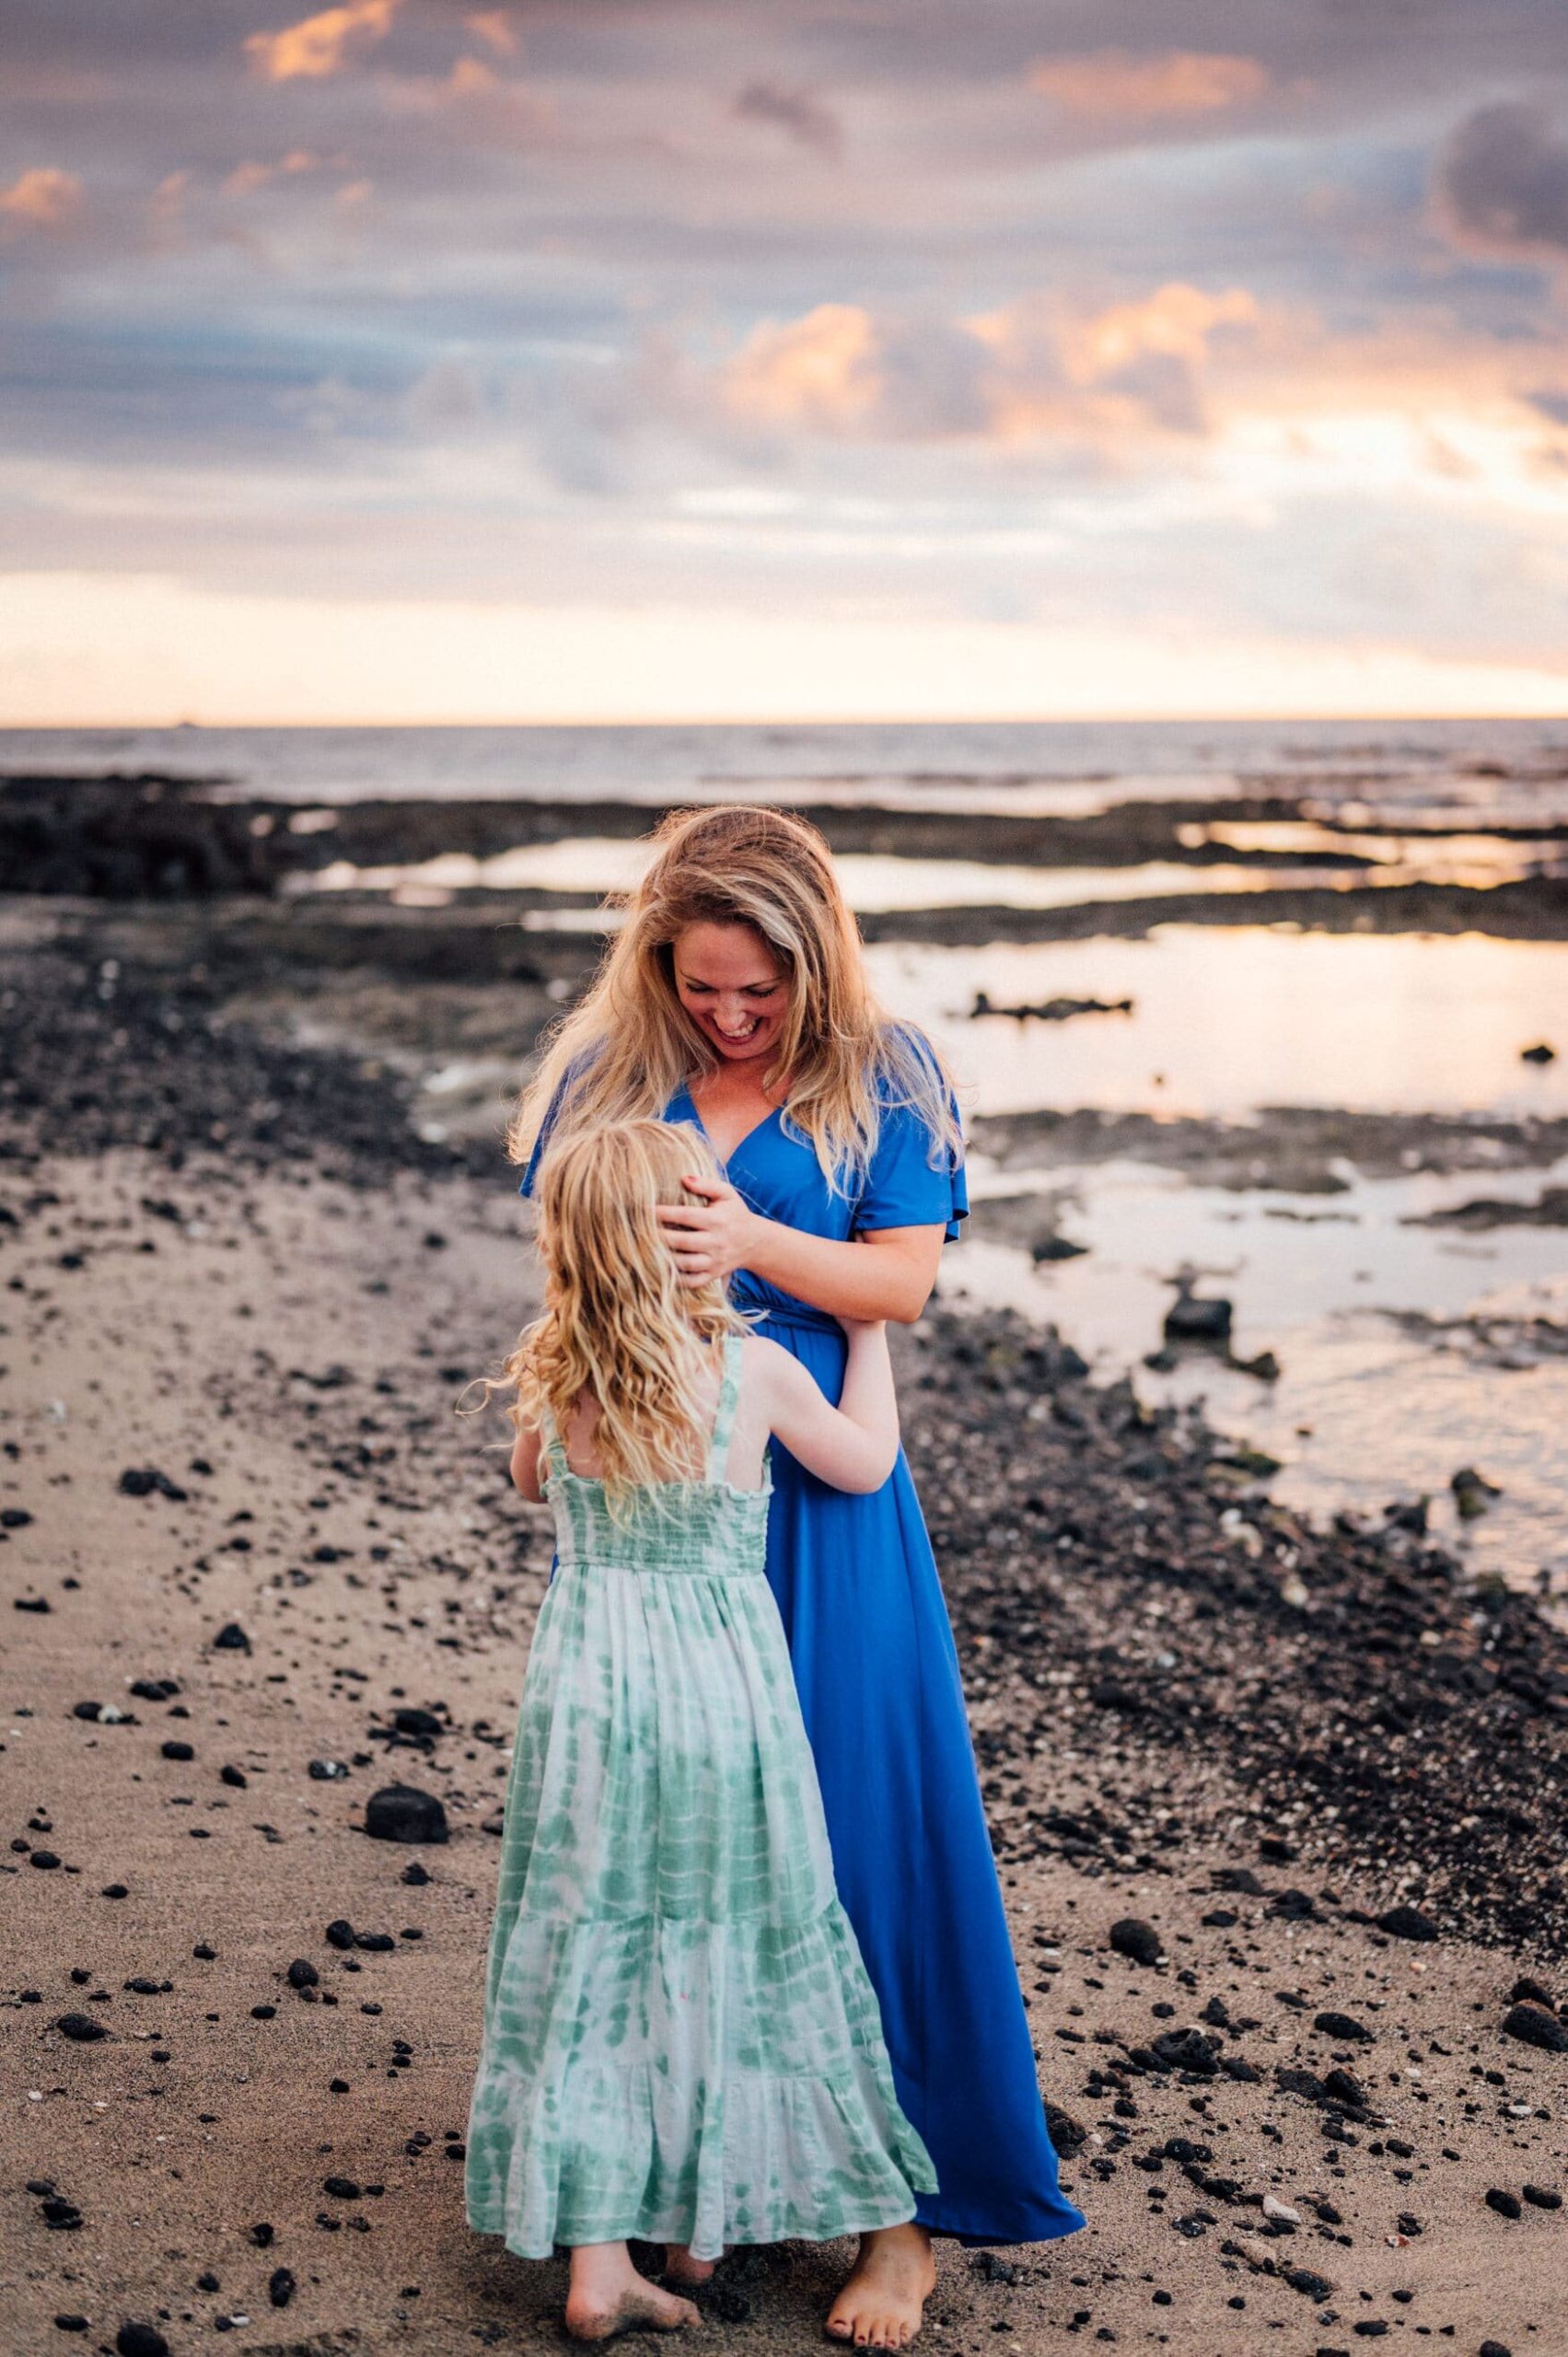 mother-daughter-photo-session-beach-33.jpg